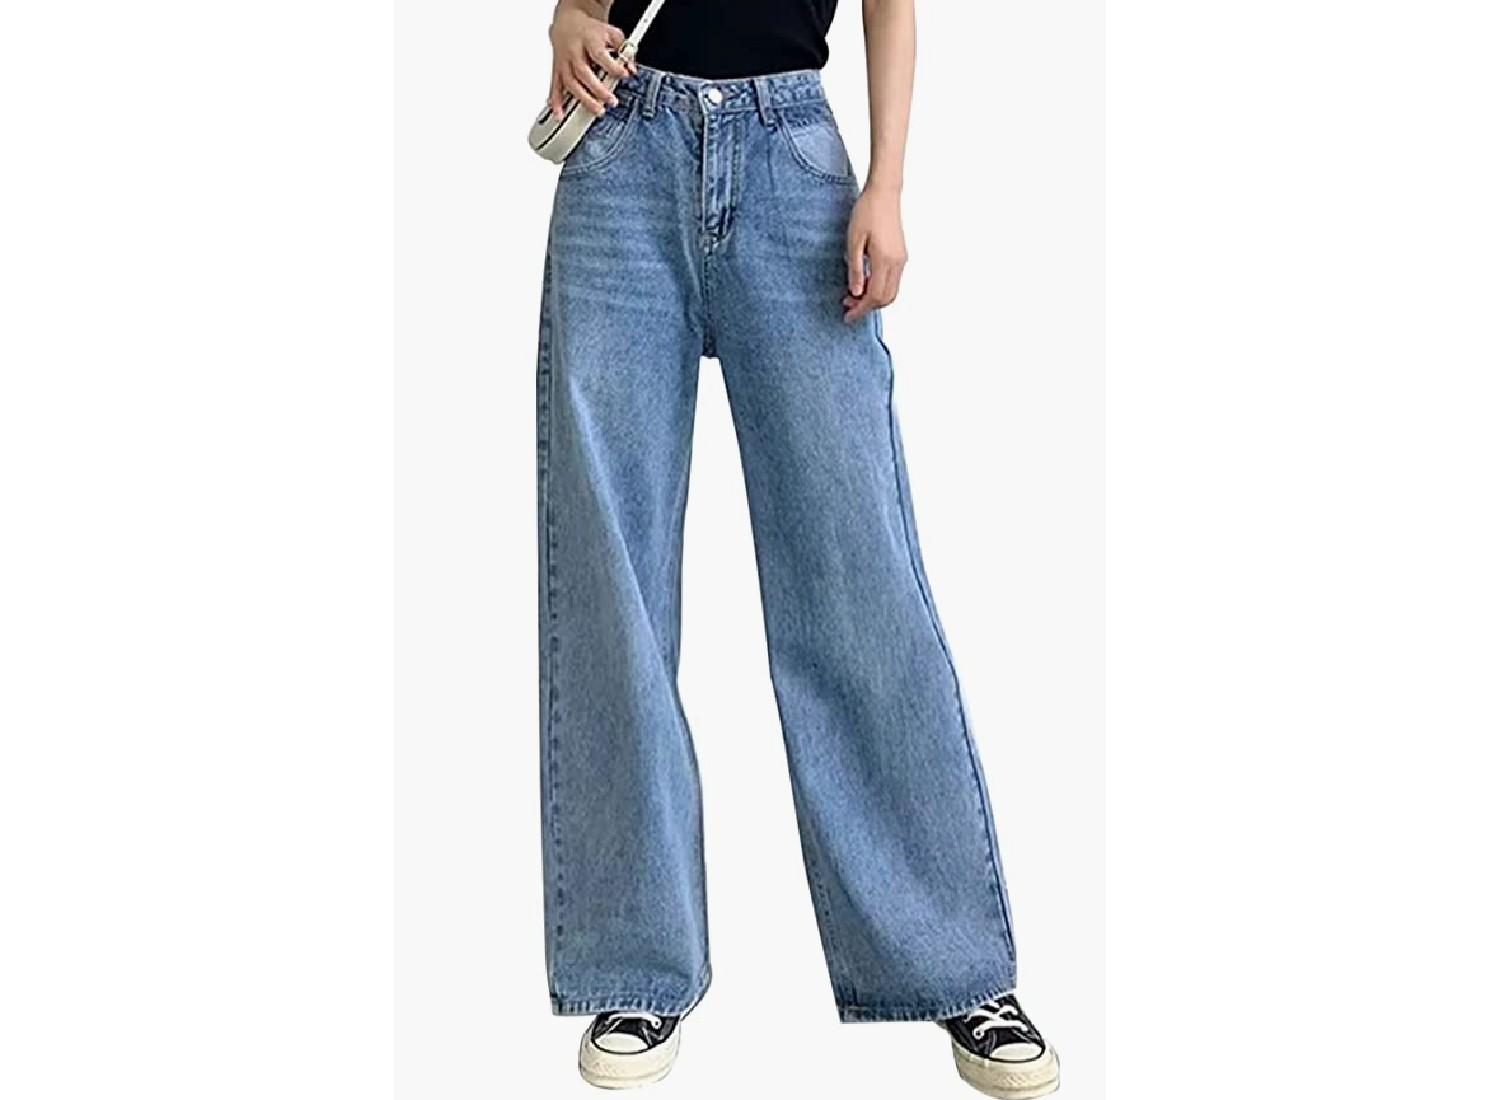 A woman wearing baggy jeans.